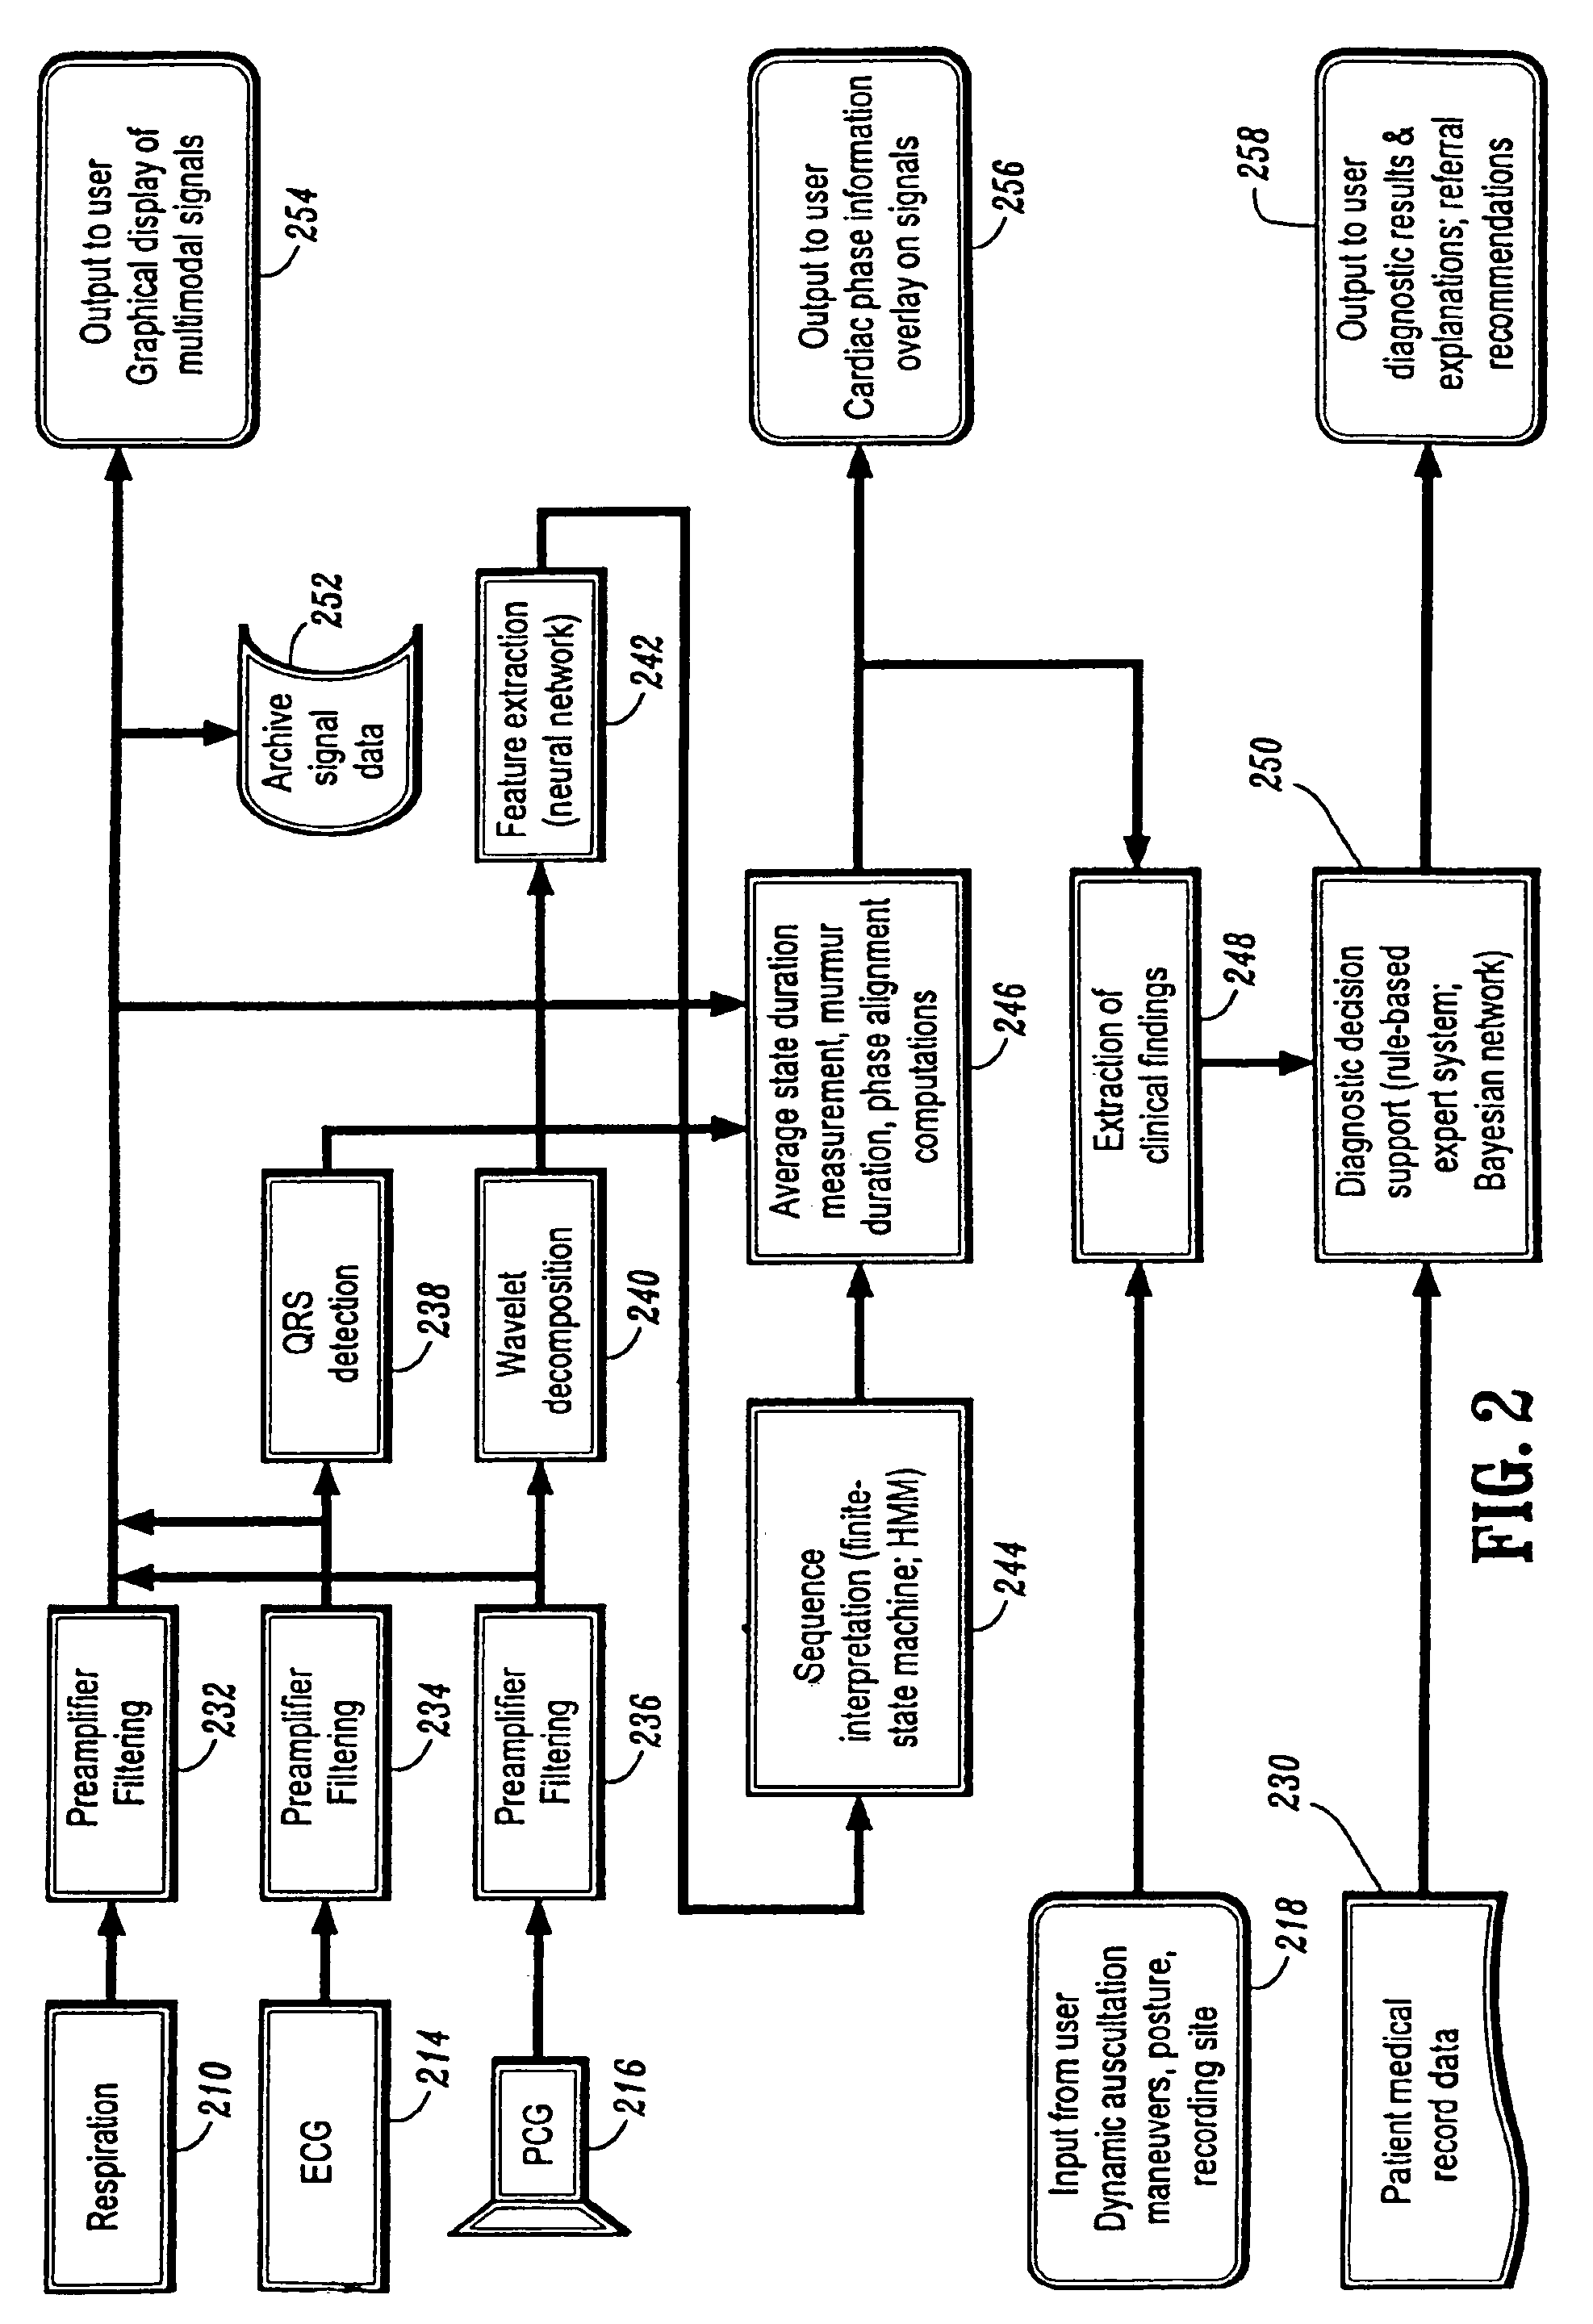 Multi-modal cardiac diagnostic decision support system and method